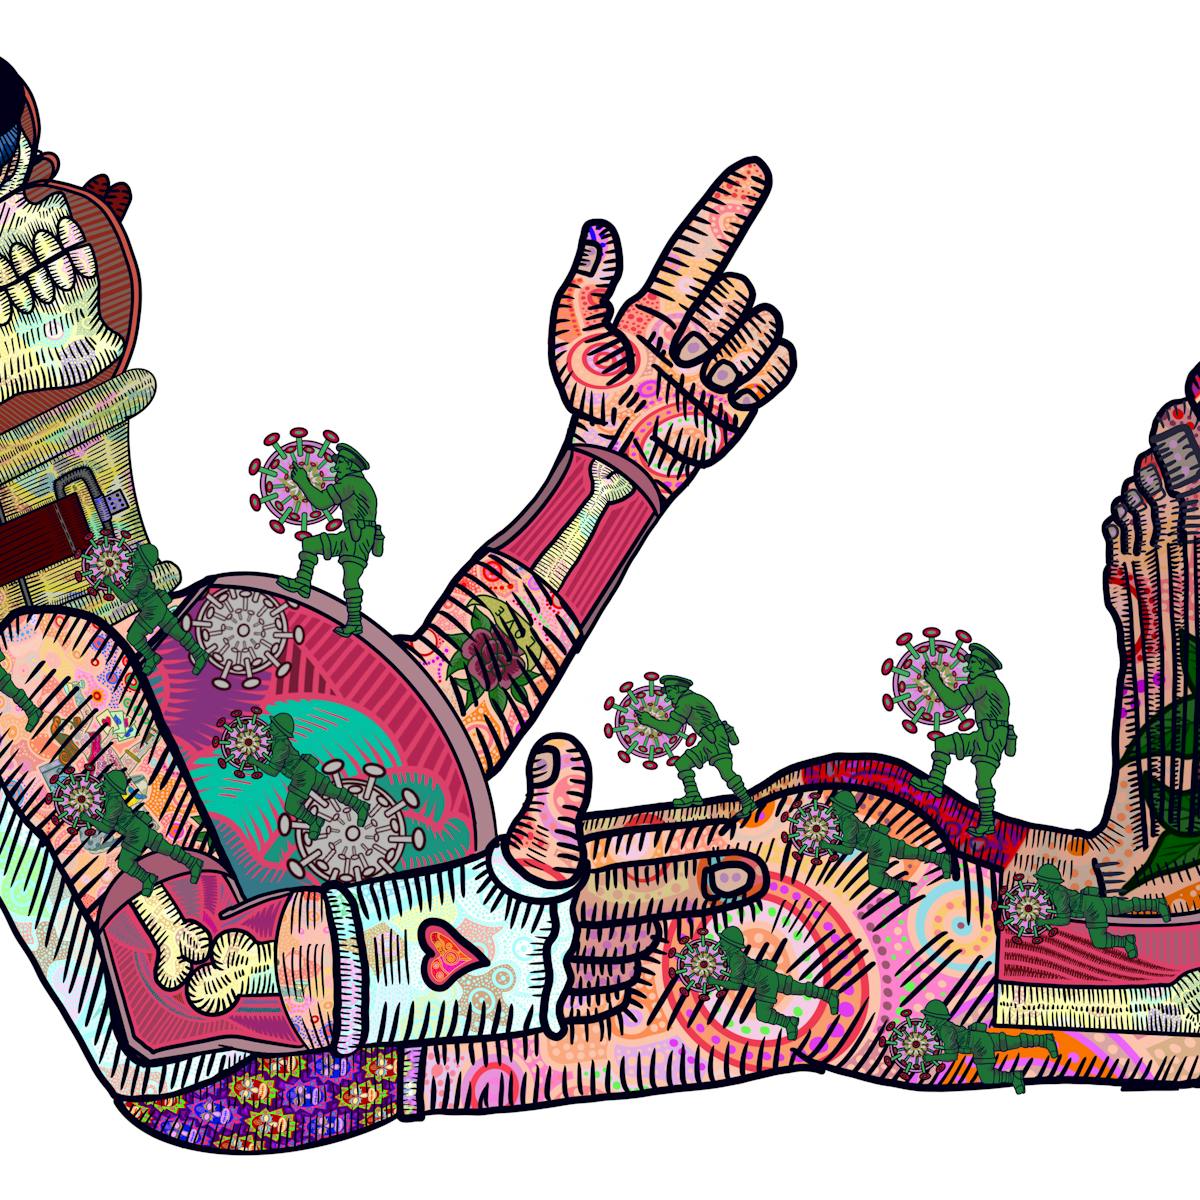 A  semi-reclining figure has one arm half raised with index finger pointing up and the other arm beside the body but also with index finger pointing. Both legs are extended and end a pair of large bare feet. The body is covered in colourful patterns and designs and what appears to be a neck brace or stiff collar around the neck. The round head is see-through, showing the lower half of the skull with jawbone and teeth in profile and the upper half of the head is filled by the brain and an over-sized eyeball. Several small green 'toy' soldiers are climbing over the figure, moving towards the head. Each small figure carries the model of a virus molecule.